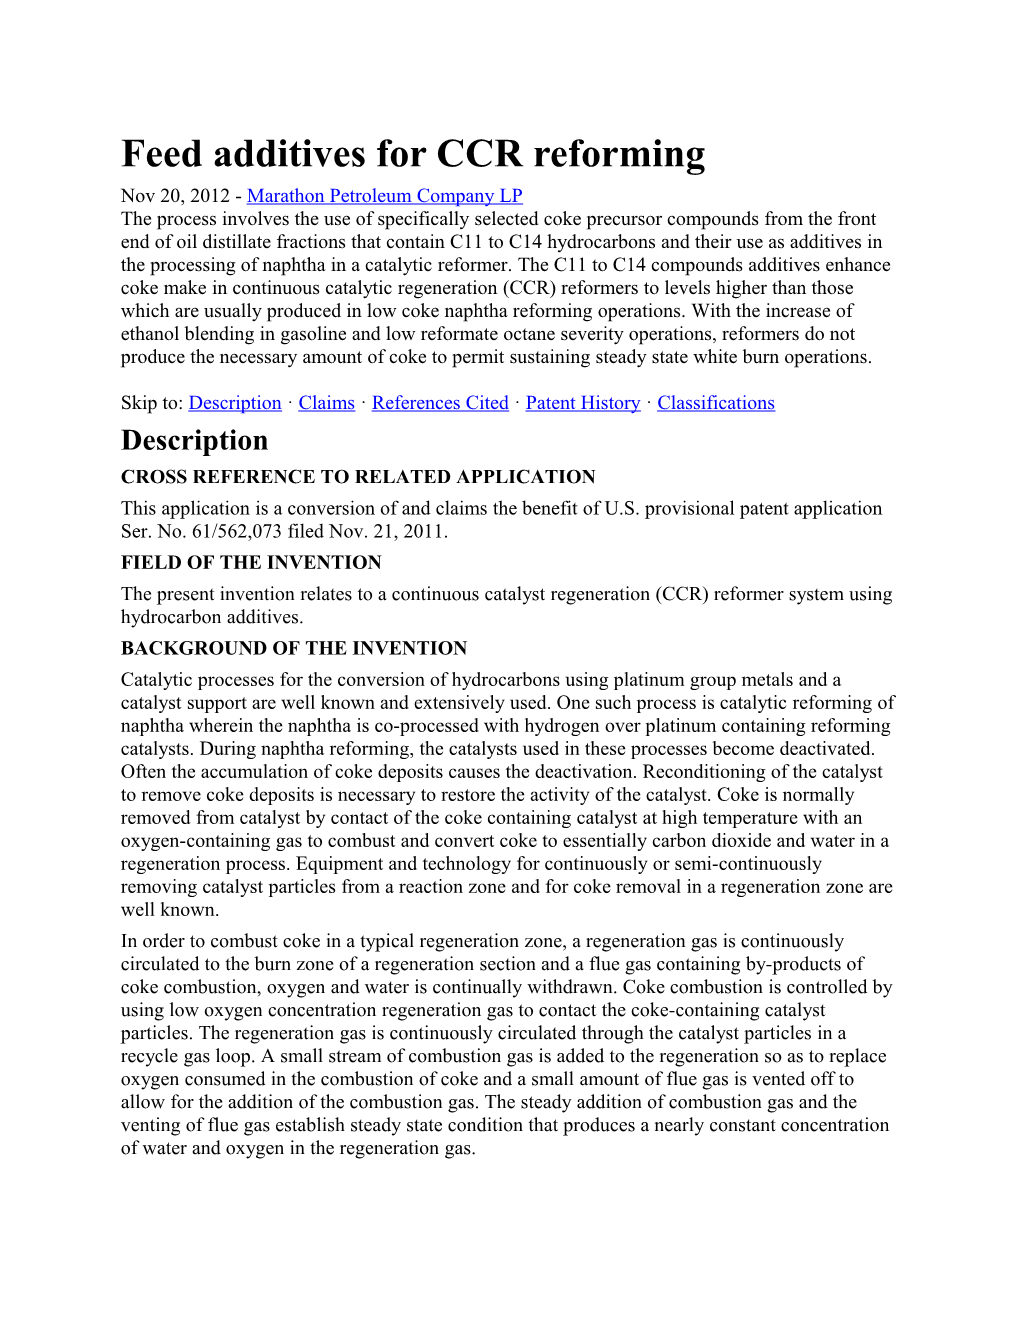 Feed Additives for CCR Reforming